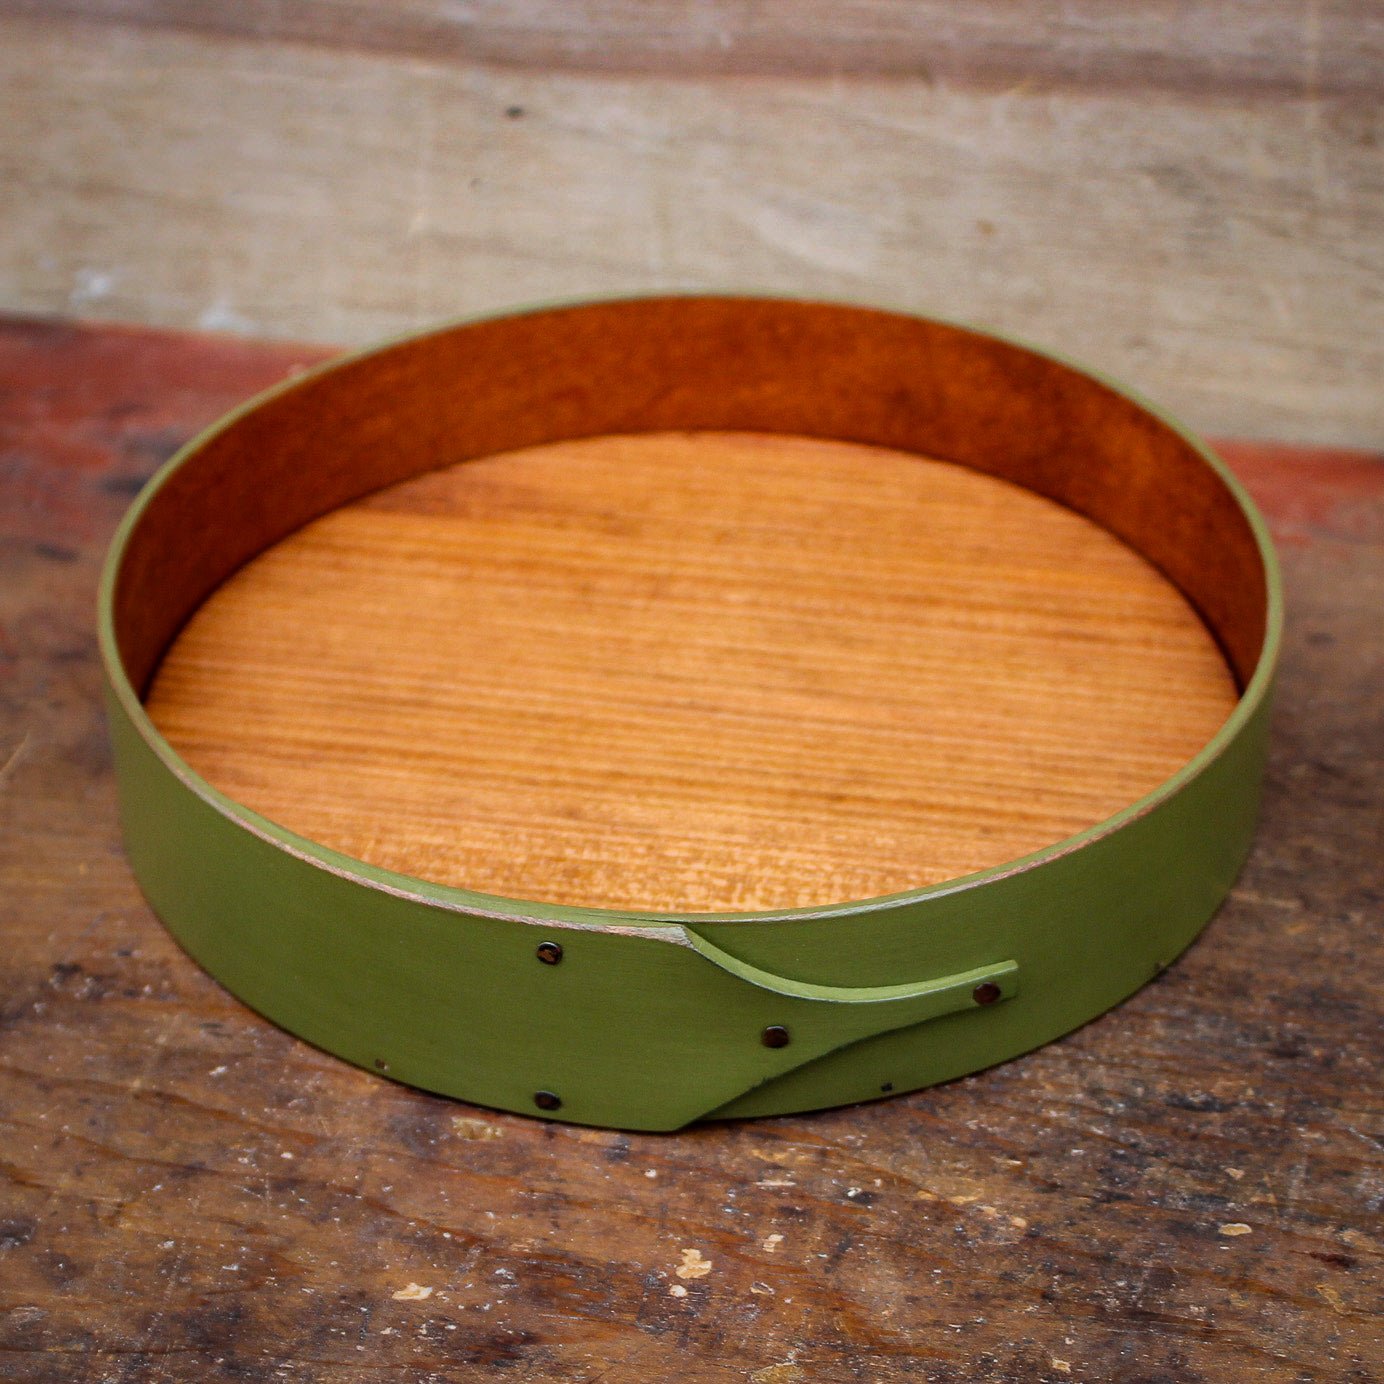 Shaker Style Round Stitchers Tray, LeHays Shaker Boxes, Handcrafted in Maine, Green Milk Paint Finish, Top View